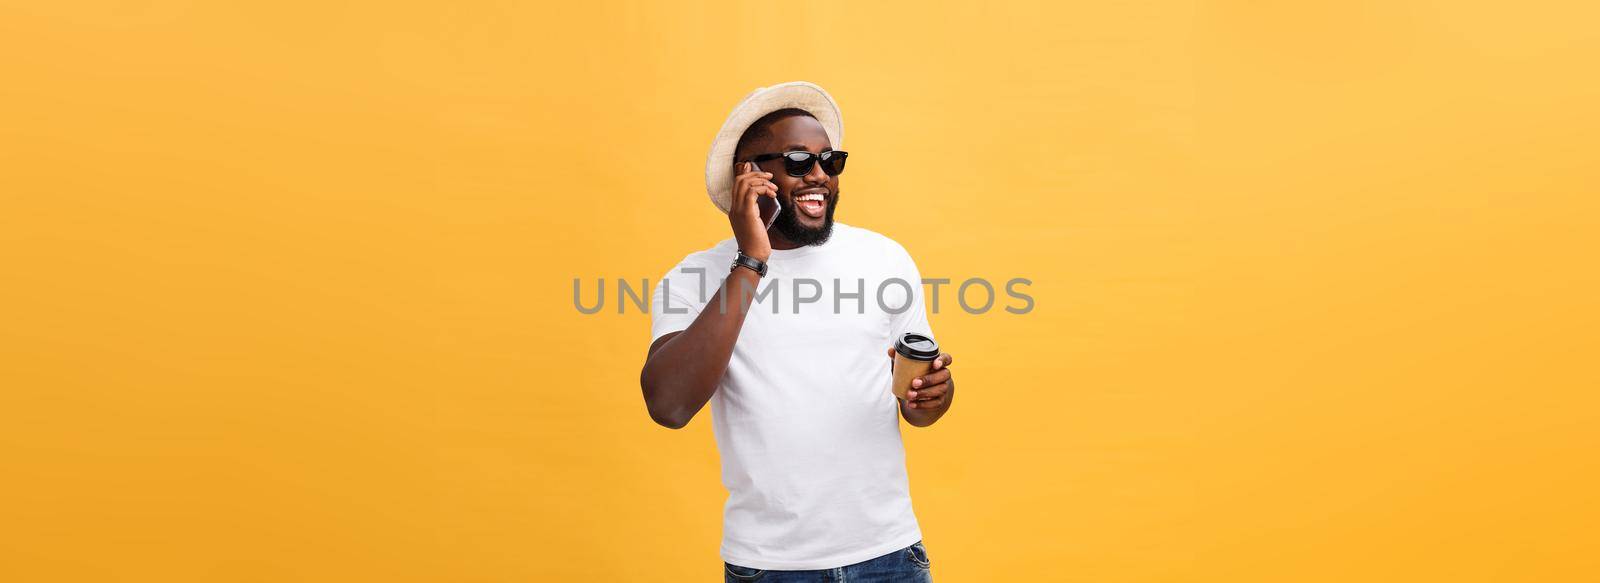 Handsome African American with mobile phone and take away coffee cup. Isolated over yellow gold background